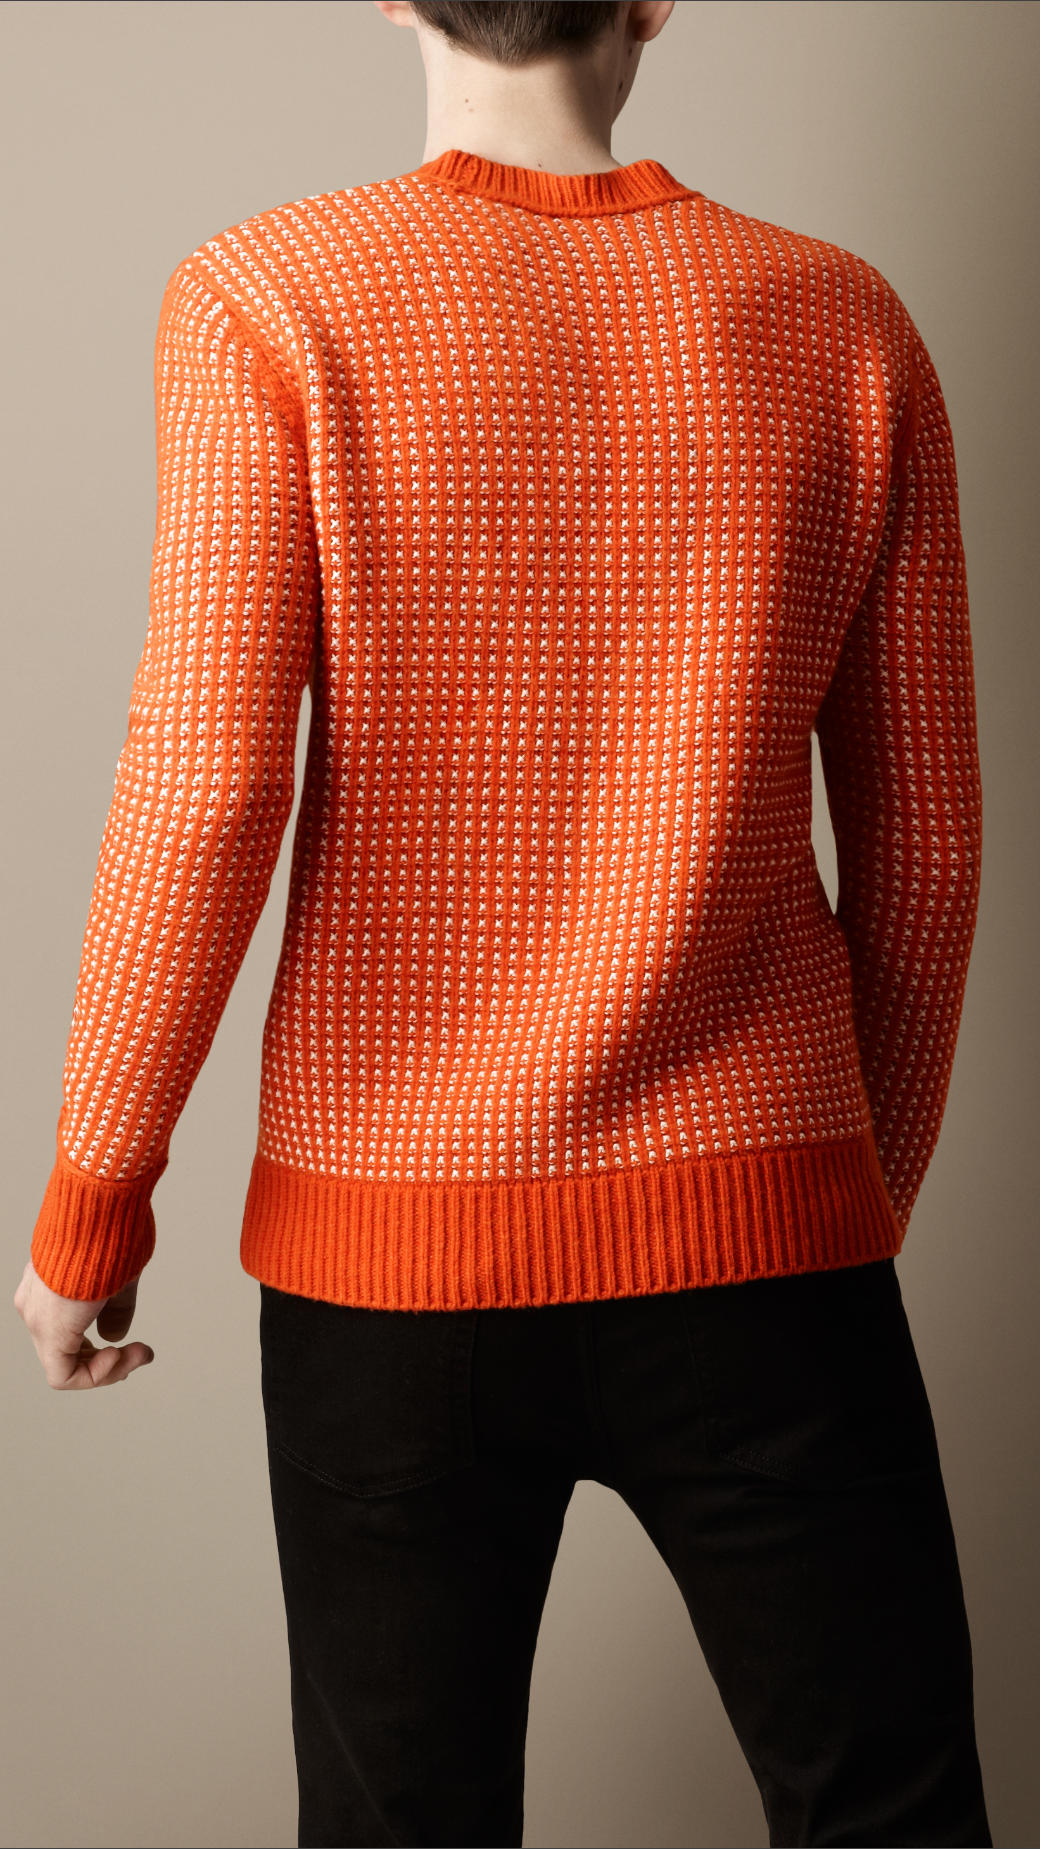 Lyst - Burberry Engineered Waffle Stitch Sweater in Orange for Men